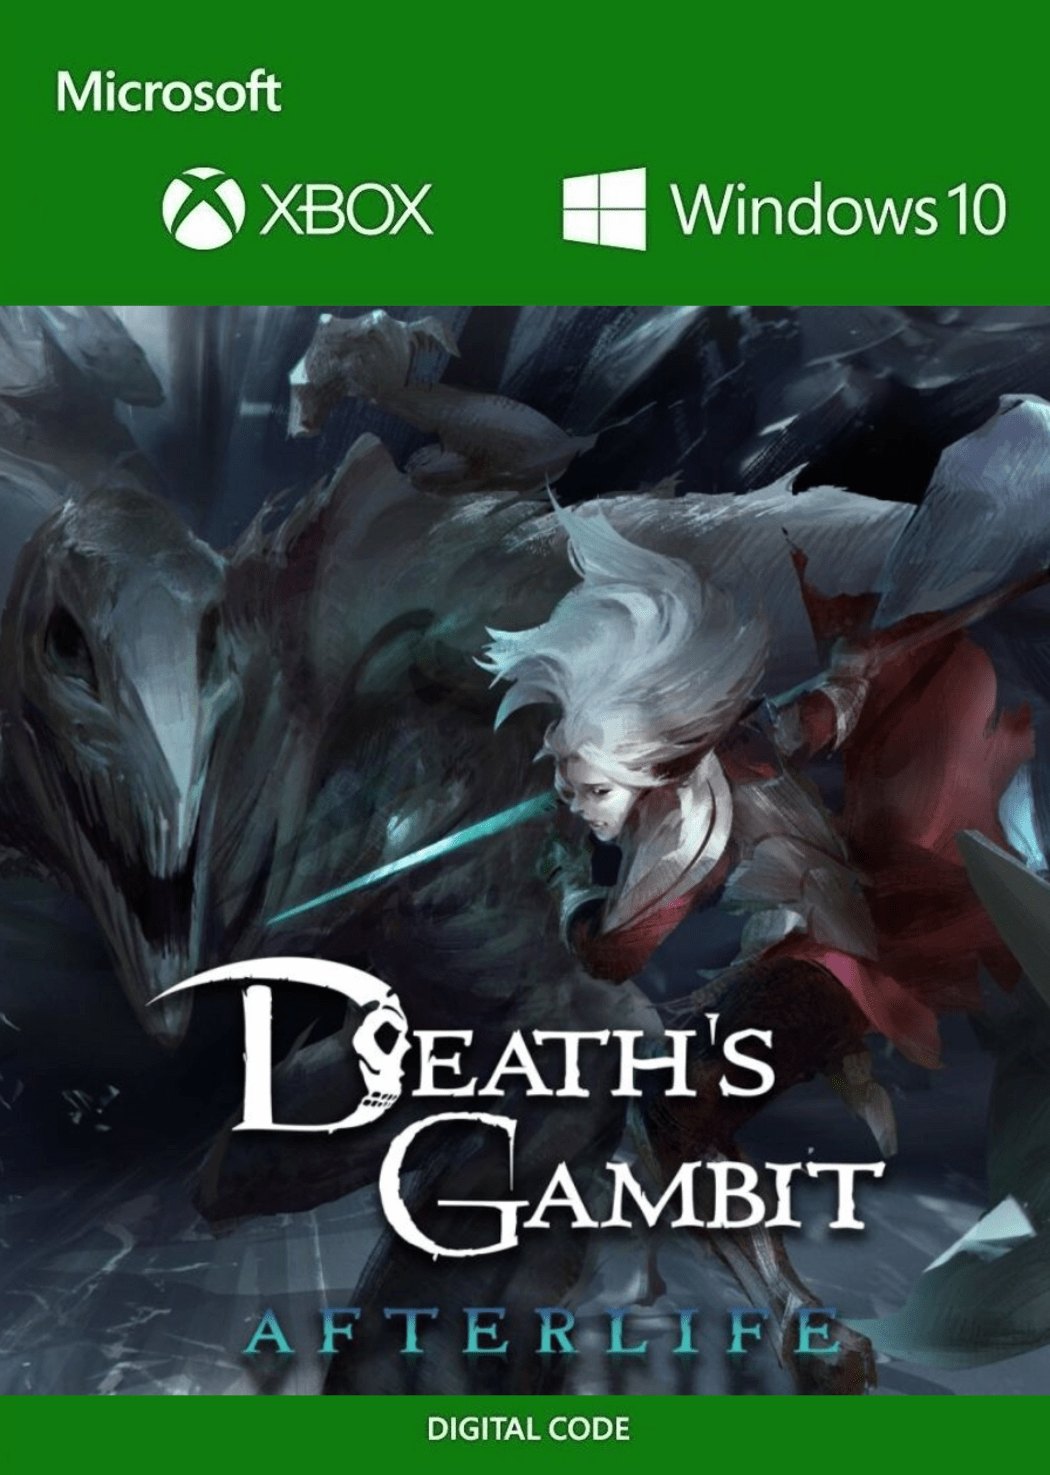 Death's Gambit: Afterlife is out now! (@Deaths_Gambit) / X